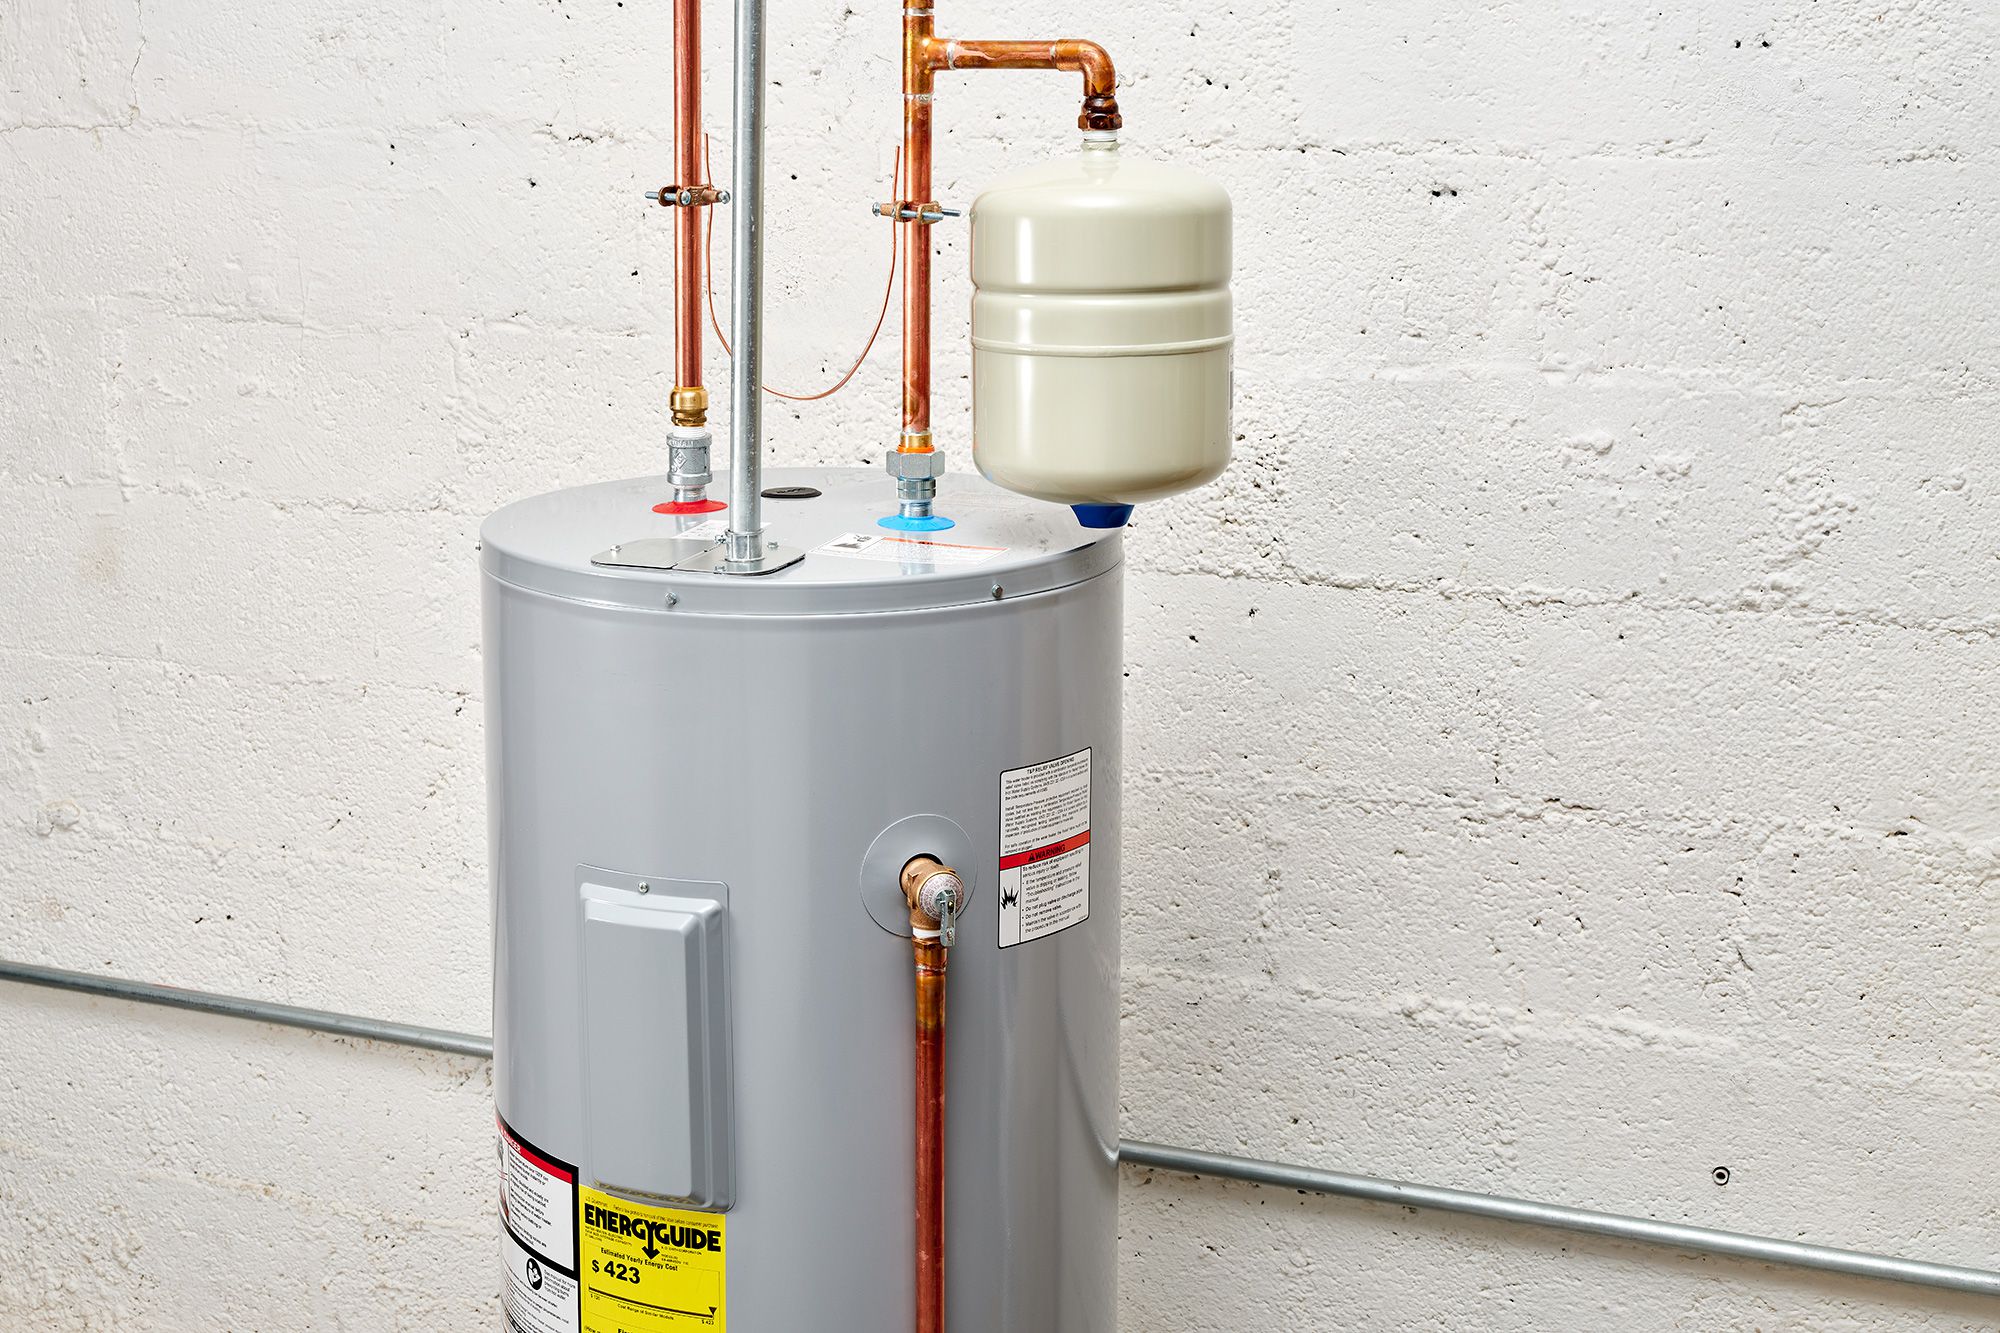 Should I wrap the water heater with an insulation blanket?